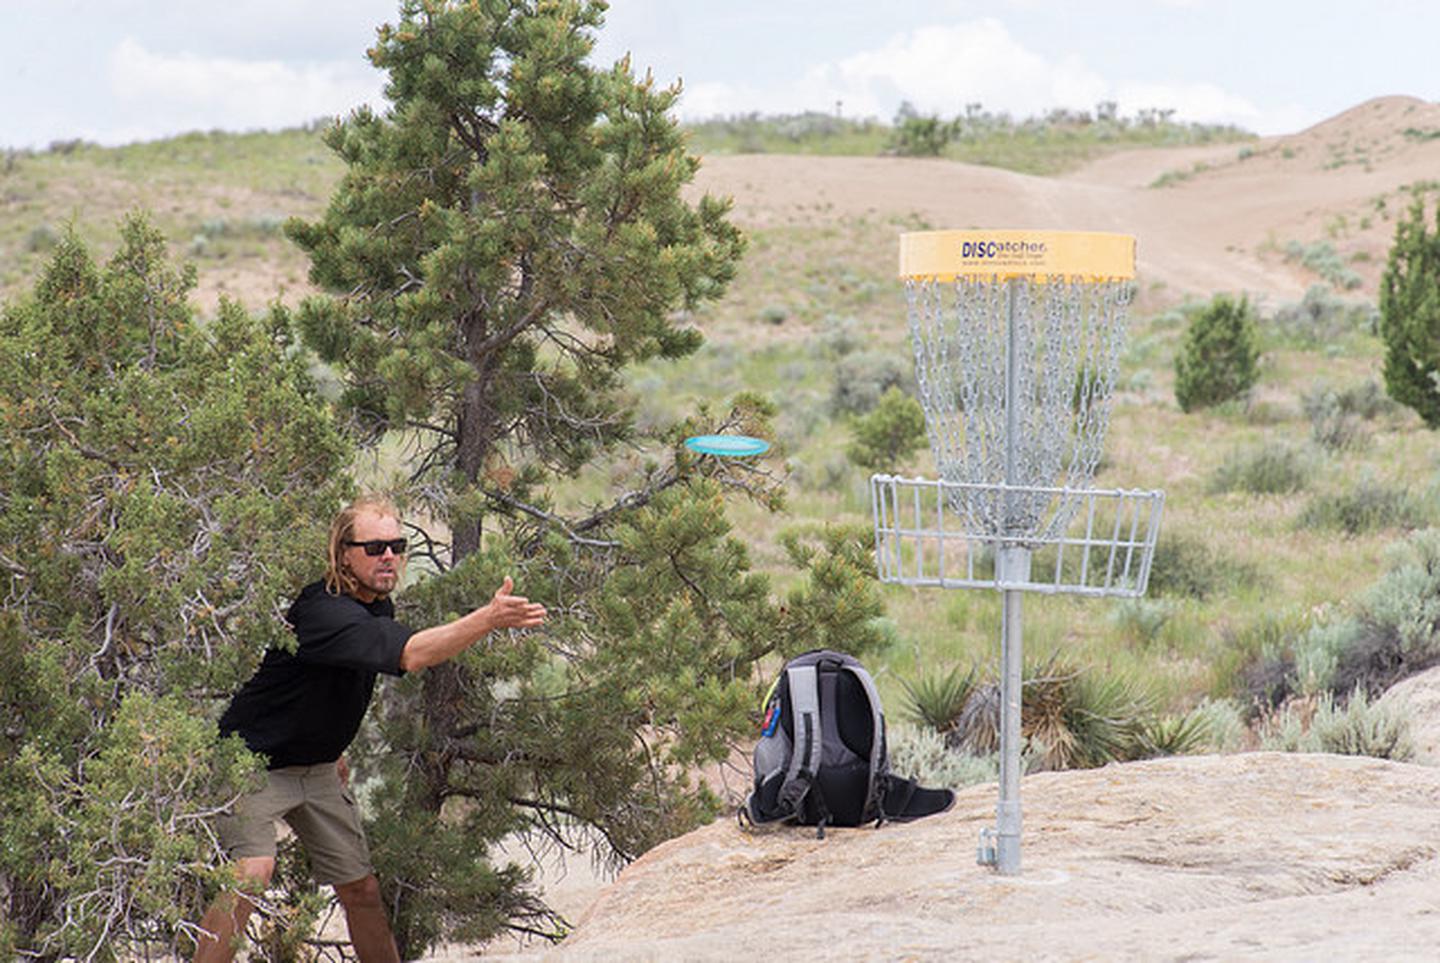 Three Peaks Disc Golf CourseThree Peaks Recreation Area provides a challenging disc golf course.